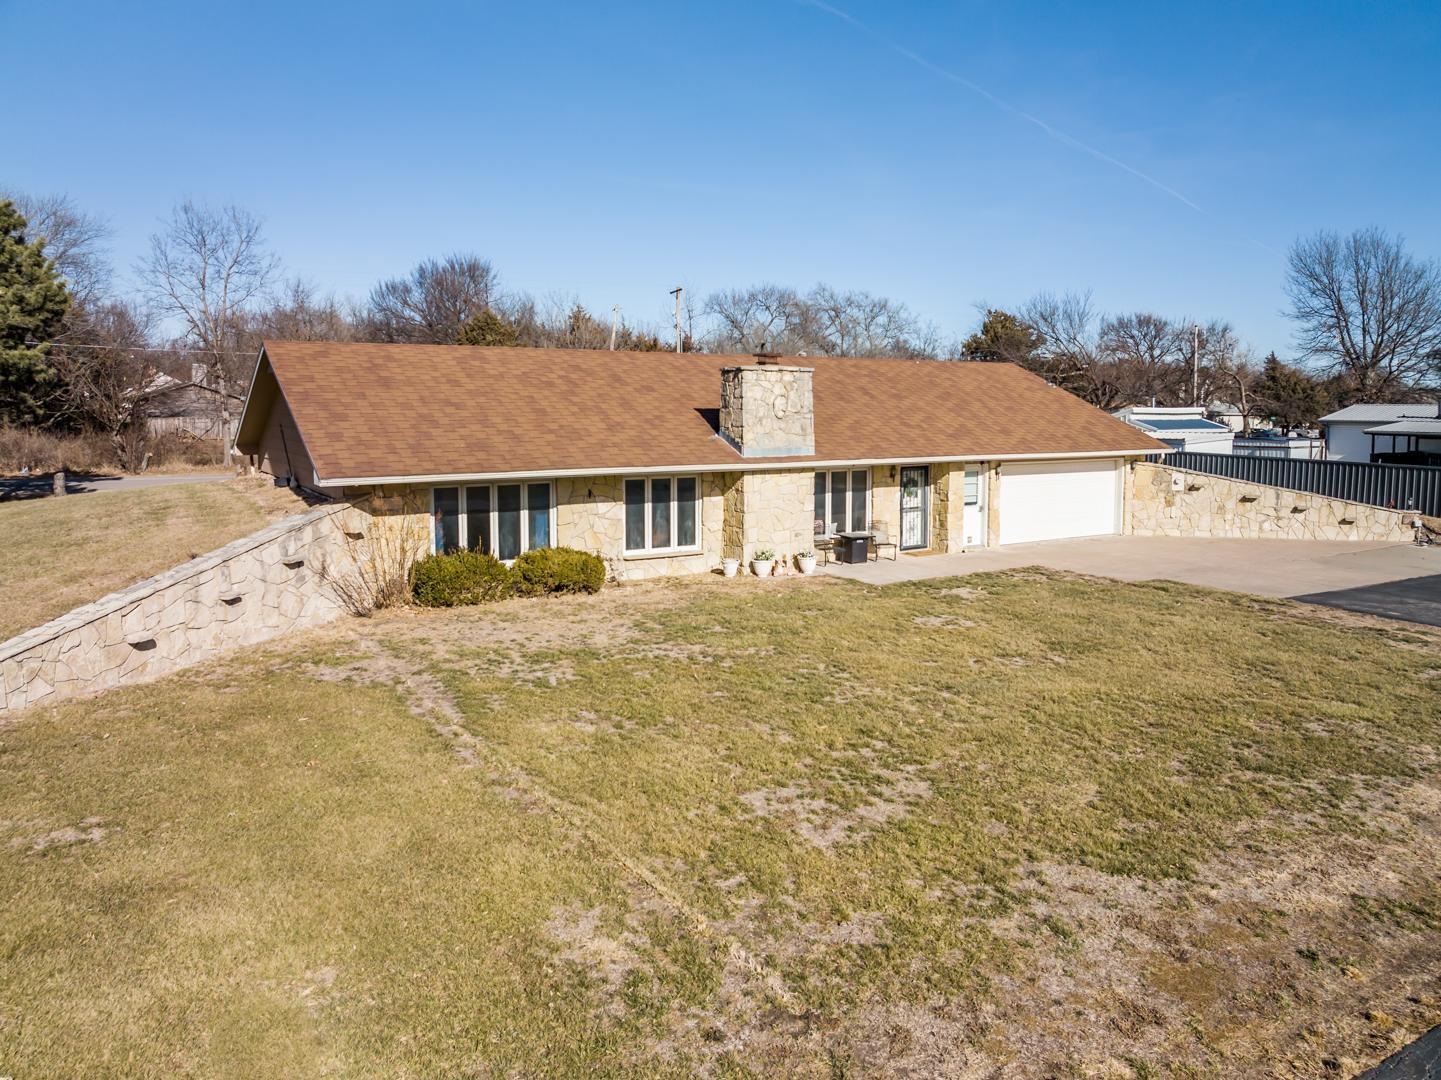 So many possibilities with this home on 1.3 Acres on the edge of Benton.  2 Bed 2 Bath, 1895 sq. ft. Open floor plan, Main Floor Laundry, oversized 2 car Garage.  This is a Berm home, energy efficient earth home, located on 1.3 acres. New Appliances in Kitchen, eating bar. Woodburning Fireplace in Living Room.  Sprinkler System.  Cedar Walk-in closet.  Spa tub. Located just north of Stearman Airfield in Benton.  Seller has not lived in home, selling "as is" condition.